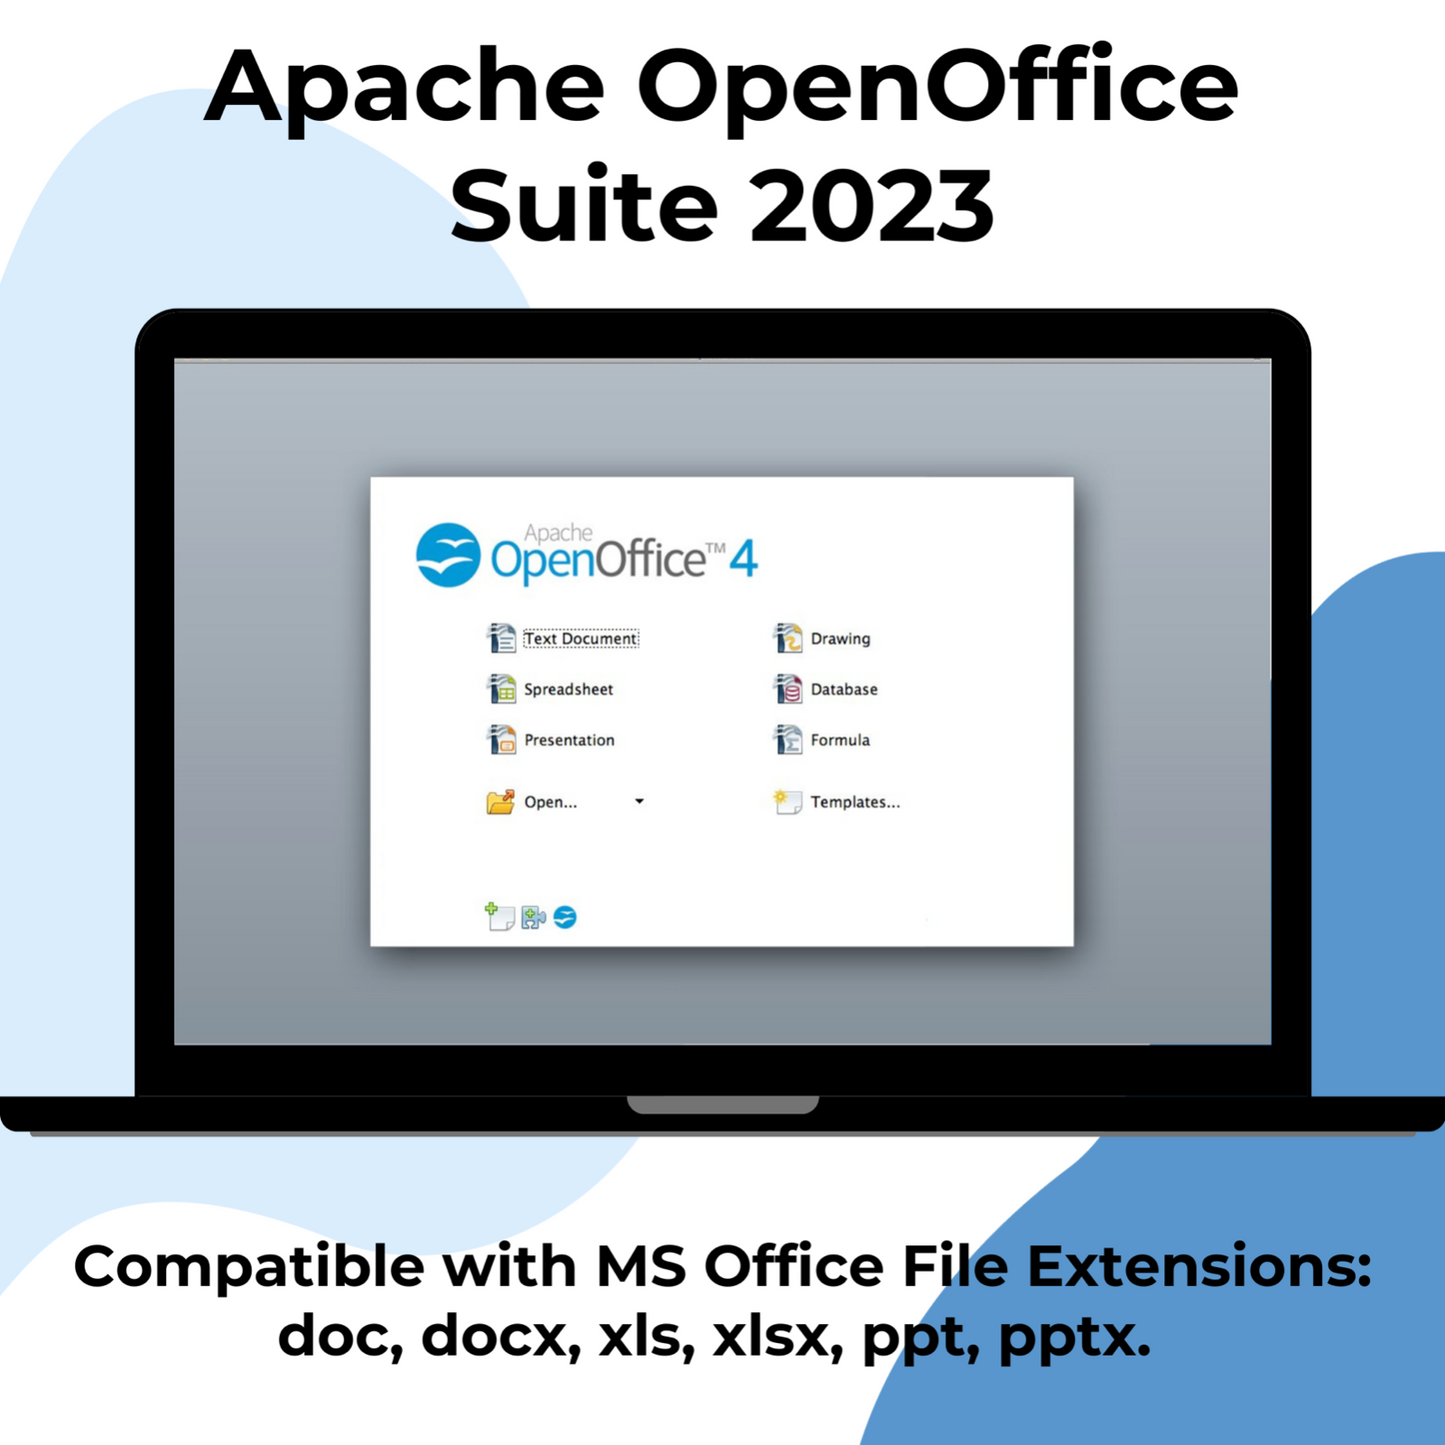 Open Office Home and Student 2023 - Office Software Suite for Windows & MAC -USB